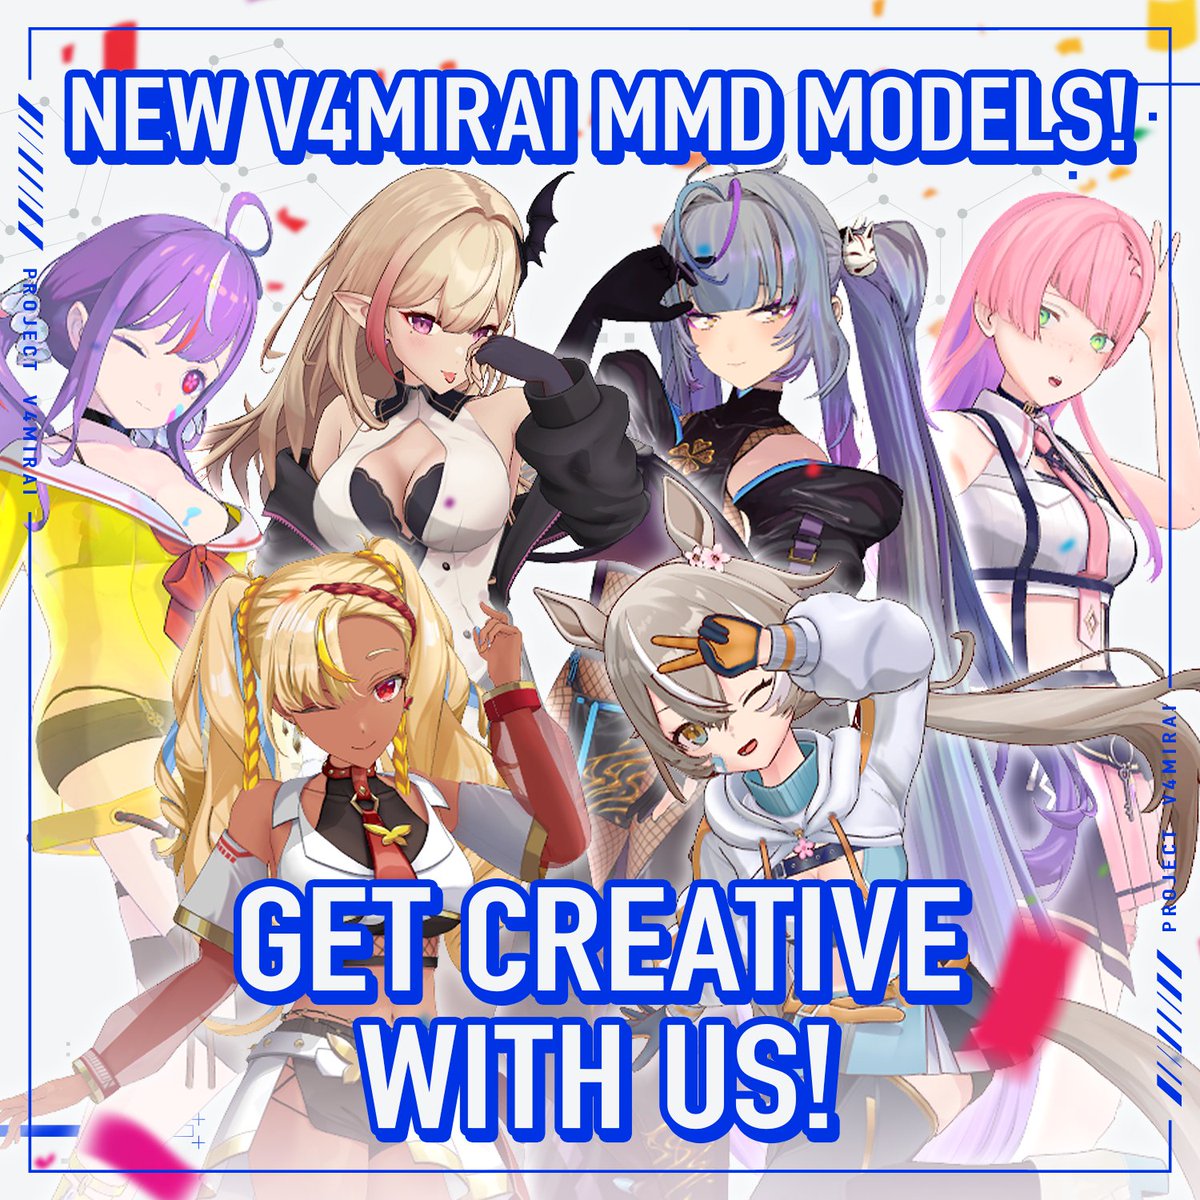 【 V4Mirai x MMD 】 As a thanks to those who’ve spent time with V4Mirai, we’re excited to share the MMD models of our talents! Everyone is looking forward to seeing what the brilliant V4Mirai community can do, so create away! 🎉 🔗 Details below.